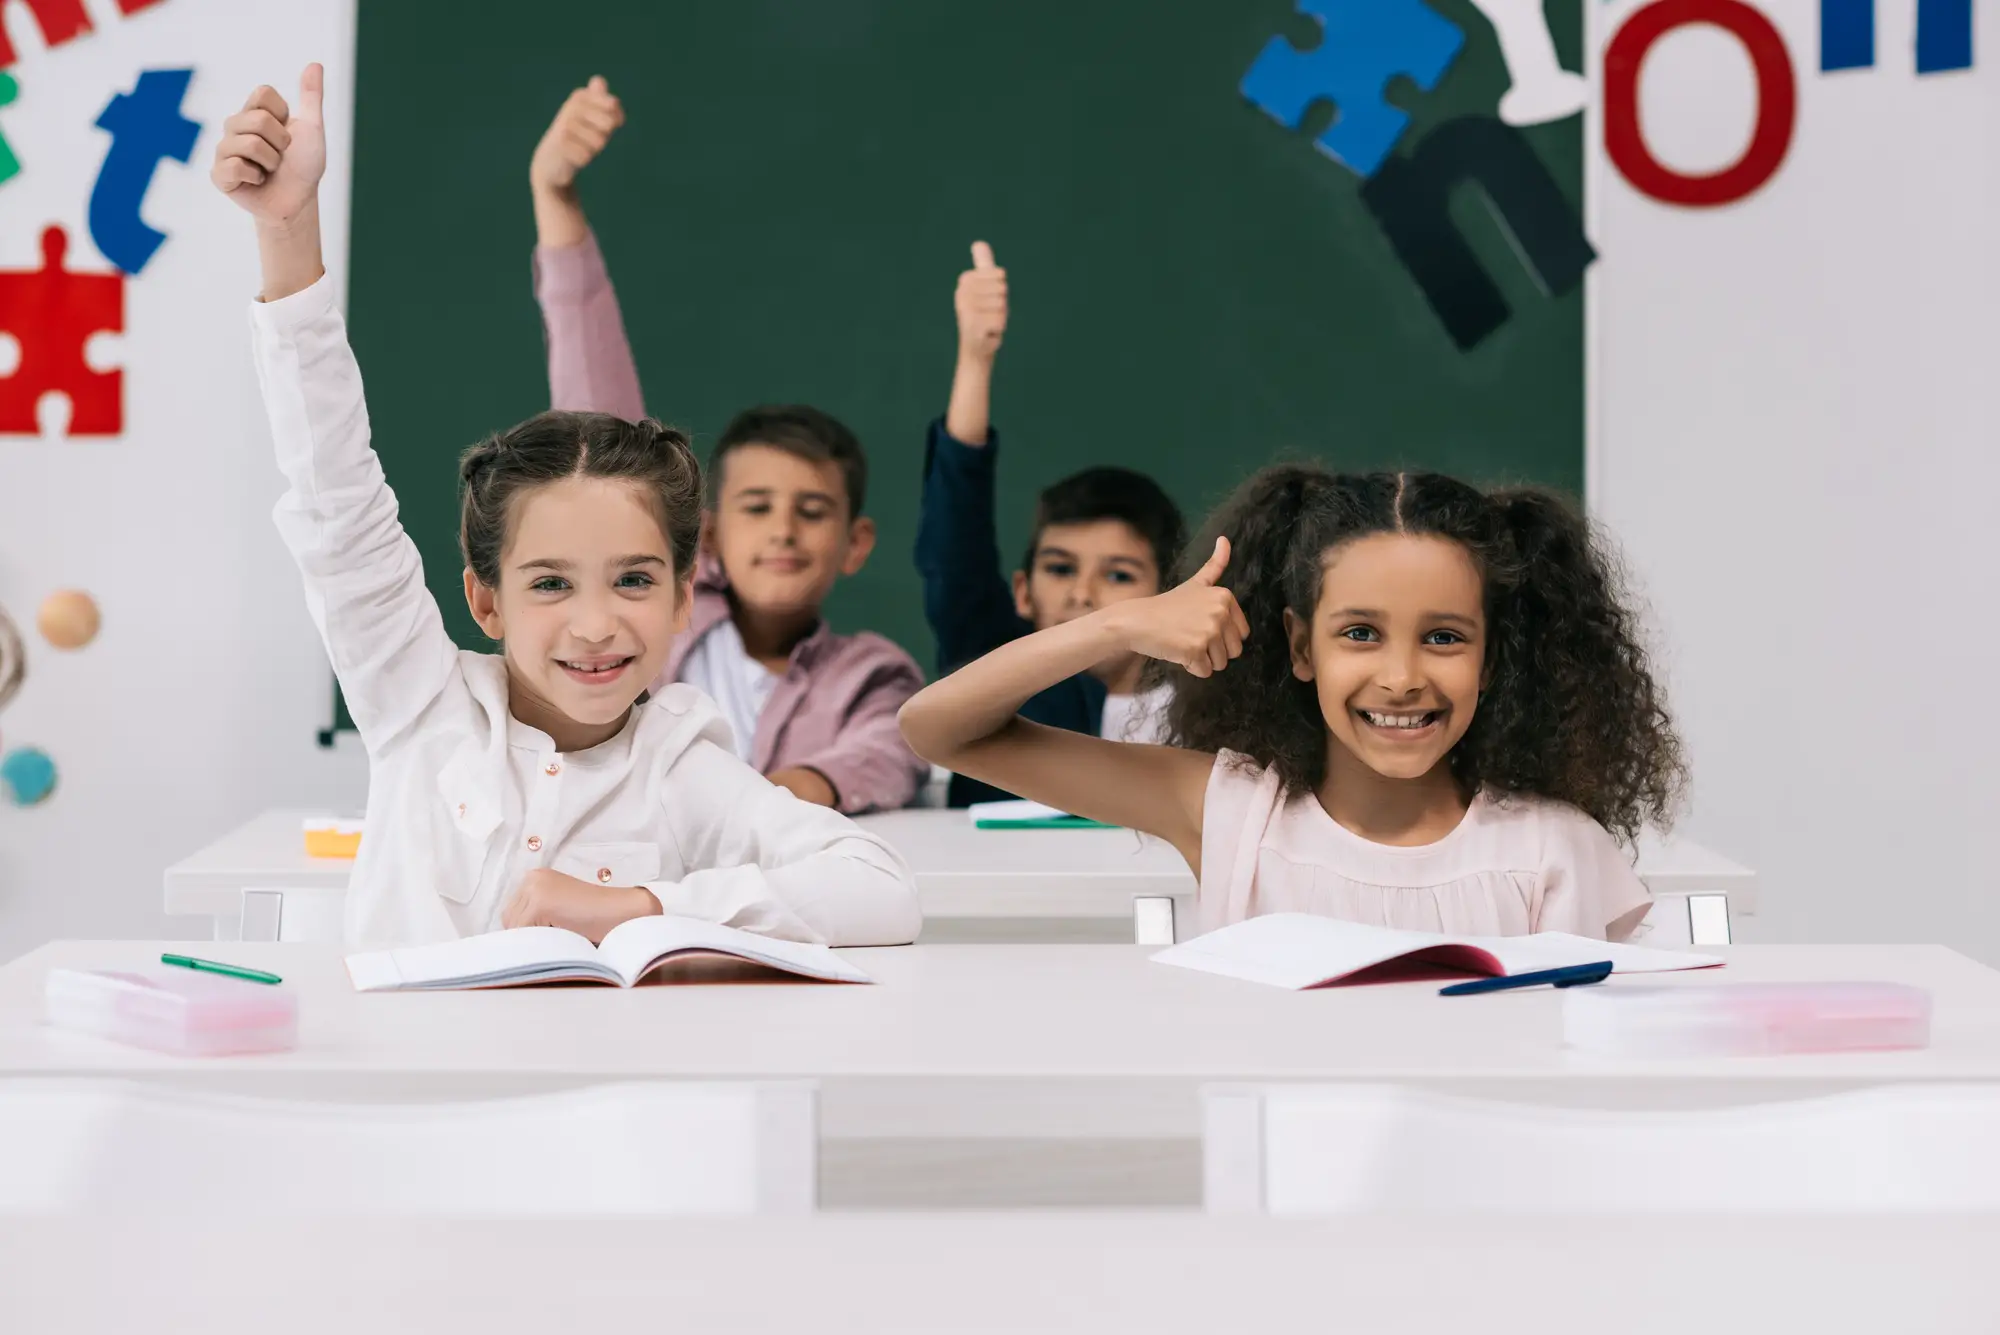 School children at desks raising their hands - How Old Are You In 3rd Grade